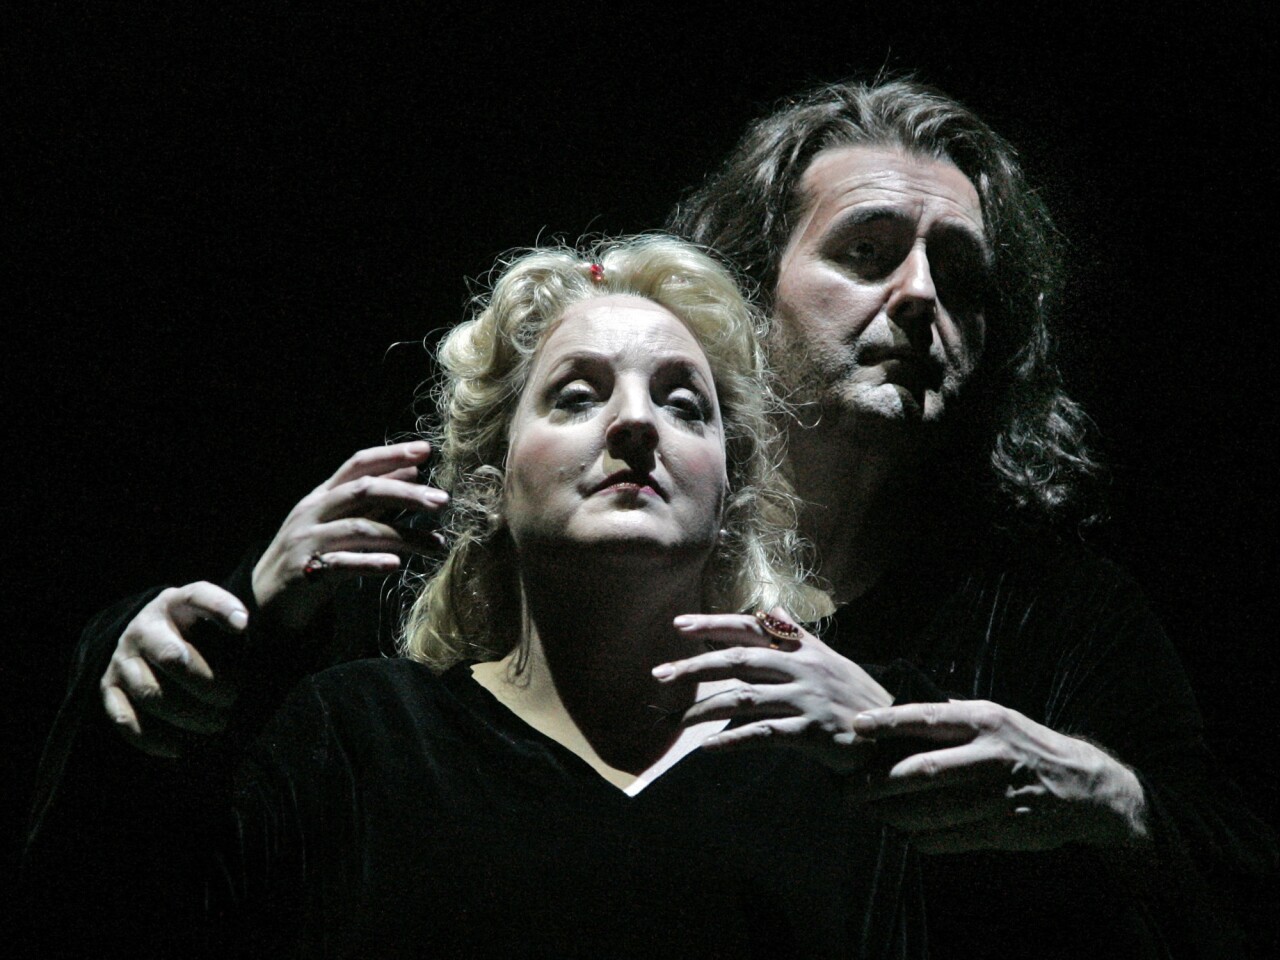 Above: A 2008 dress rehearsal of "Tristan and Isolde" by LA Opera with John Treleaven, right, as Tristan and Linda Wilson as Isolde in Act 3. Designed by David Hockney, the colorful staging of Wagner's masterpiece became a signature production of the young company. Other memorable productions created by the company include this season's "Il Foscari"; "Grendel," directed by Julie Taymor; and Herbert Ross' traditional "La Boheme."